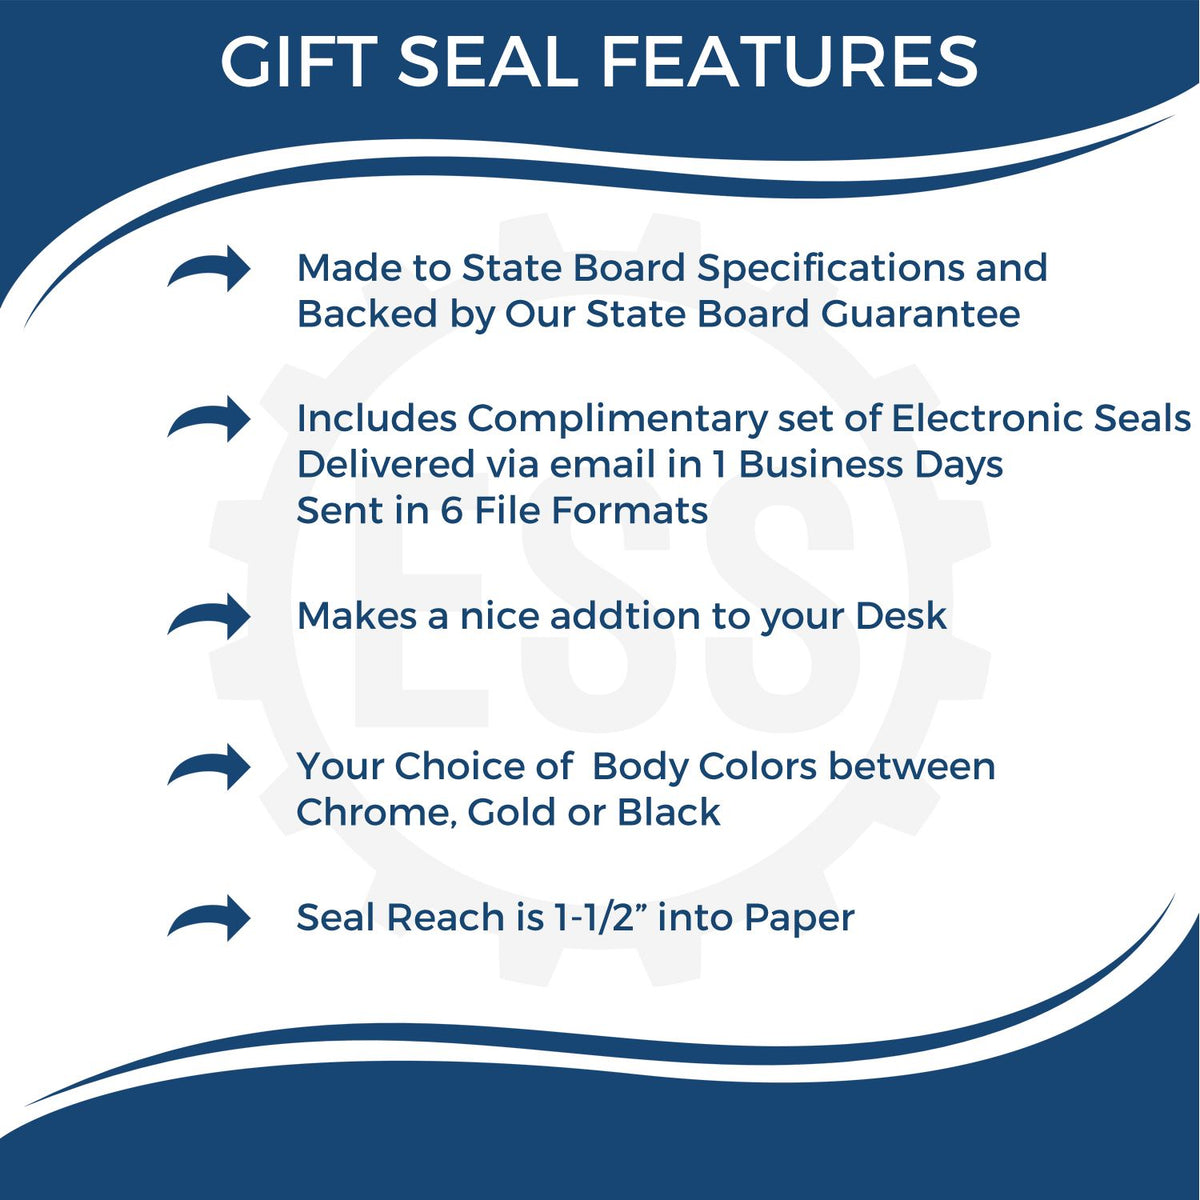 A picture of an infographic highlighting the selling points for the Gift Georgia Geologist Seal